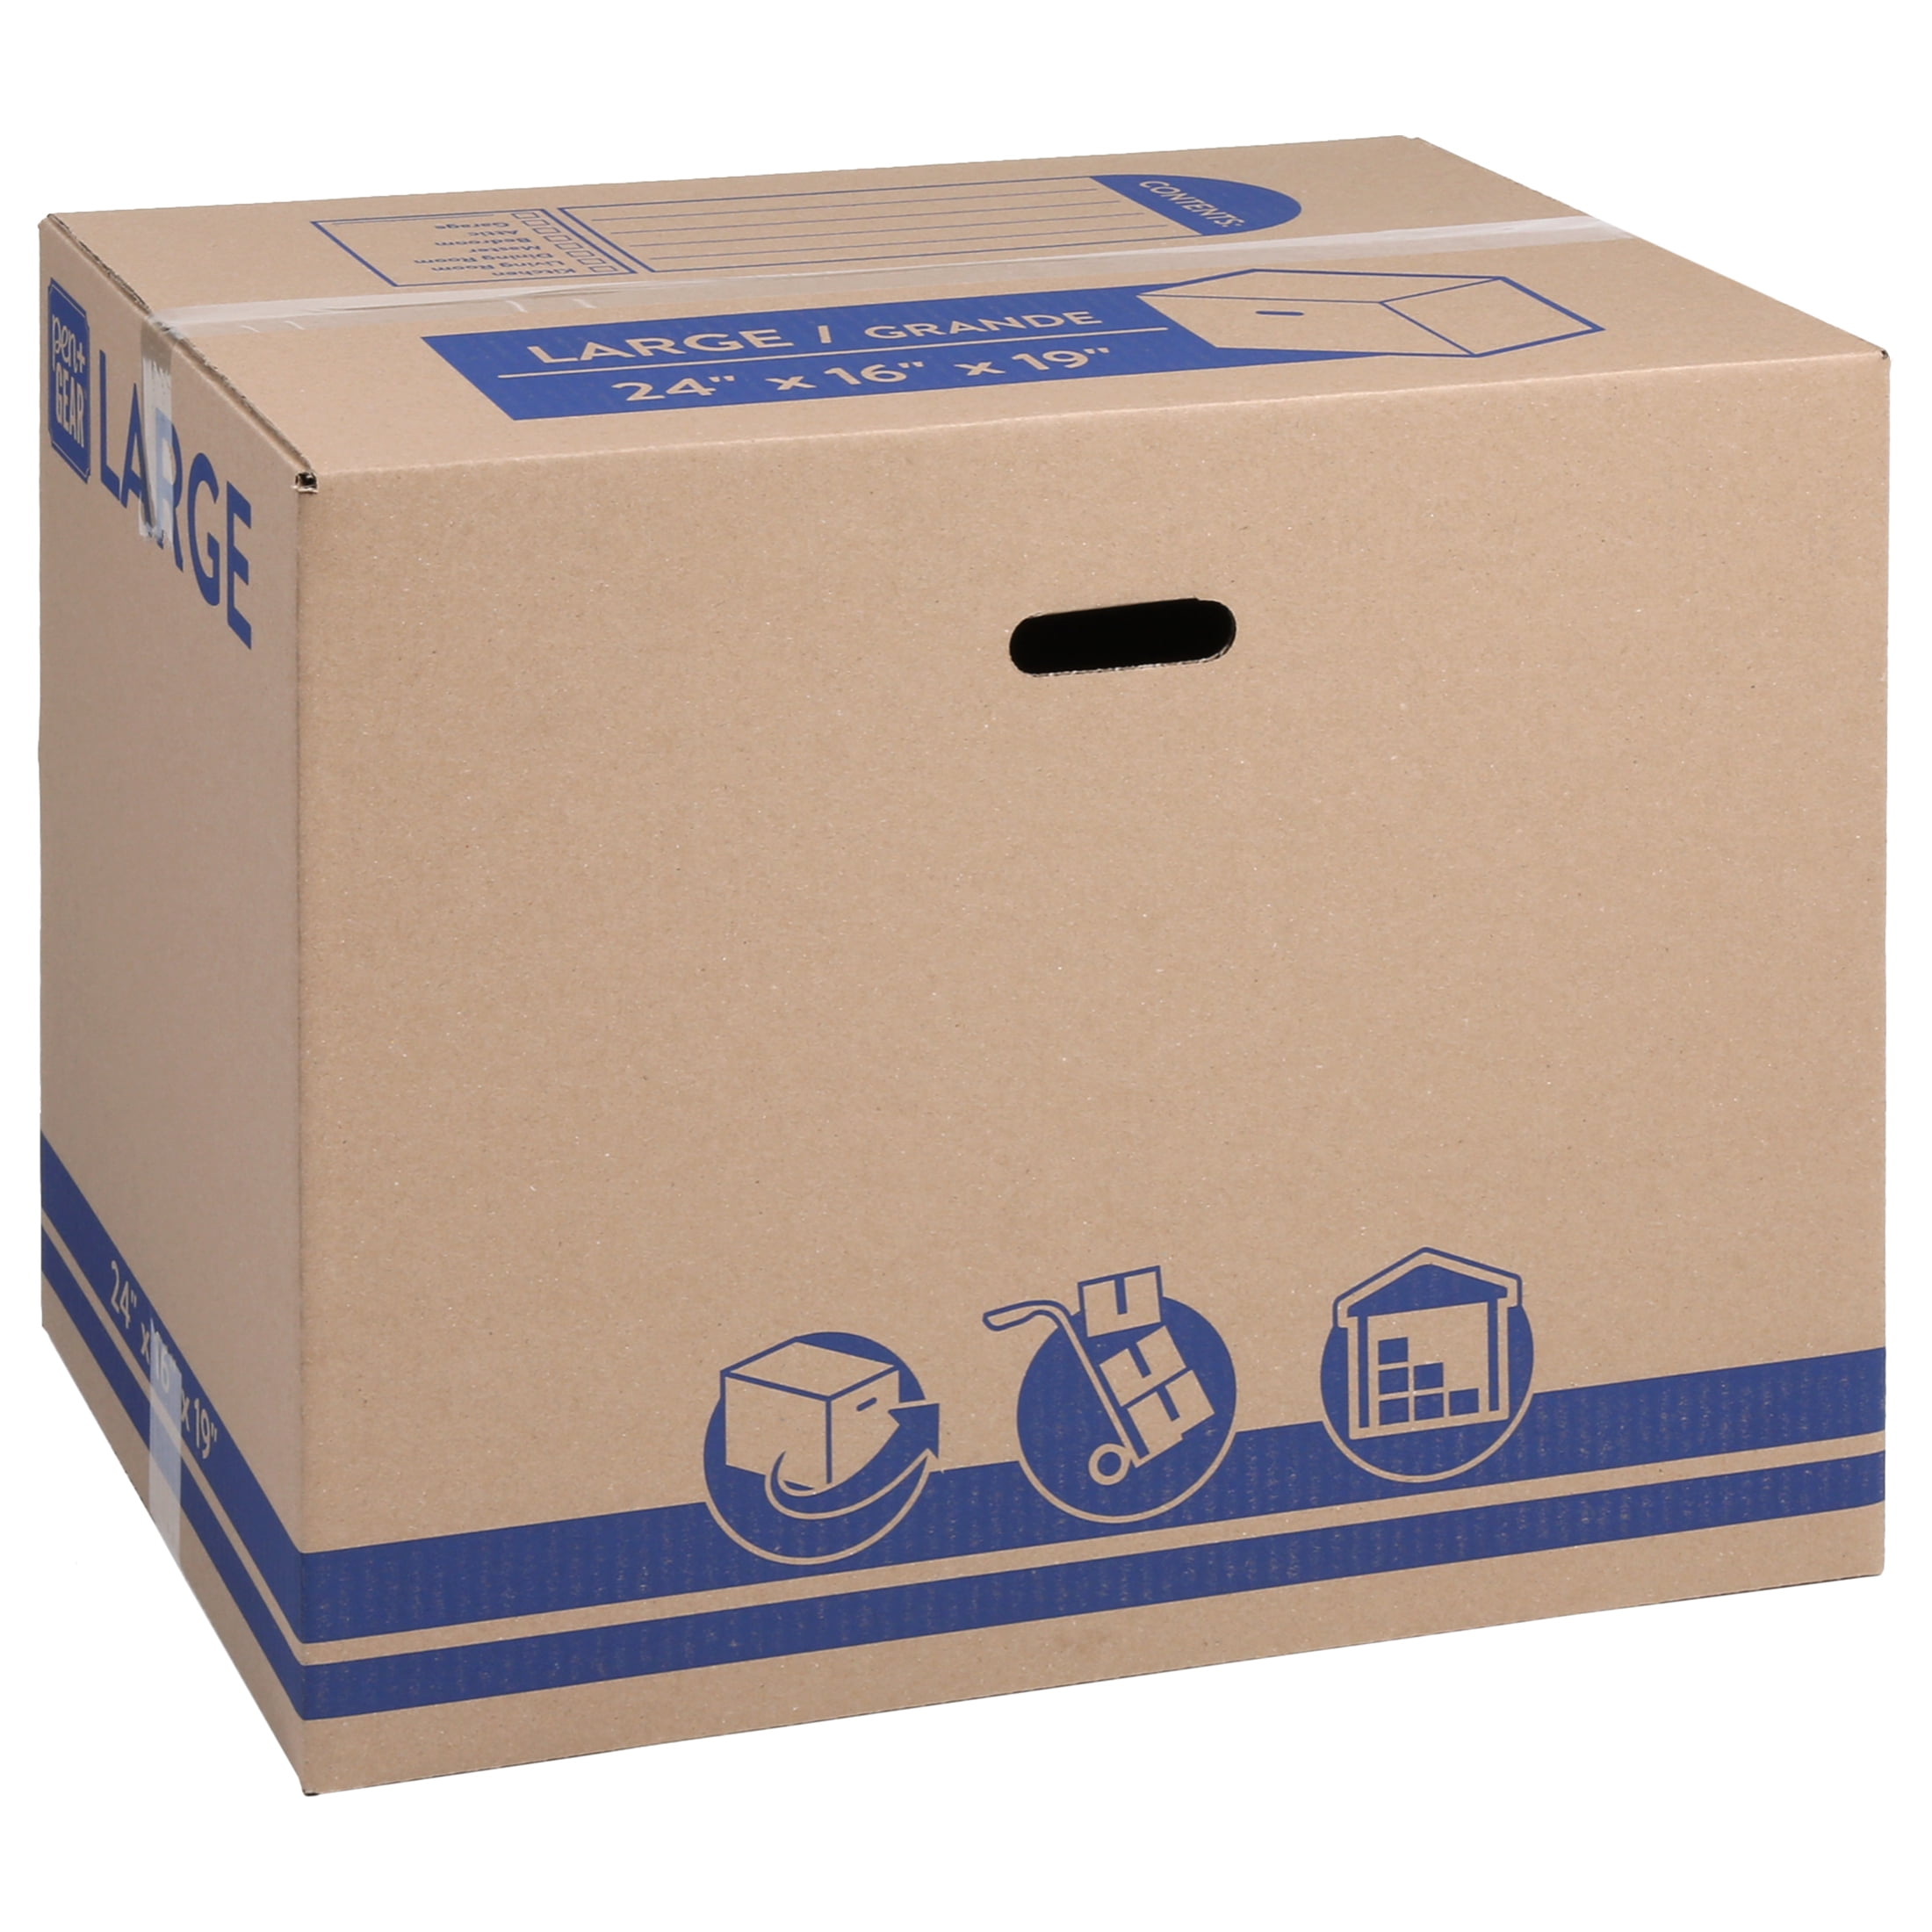 30 X-LARGE D/W REMOVAL CARBOARD BOXES 18x18x12" *OFFER* 